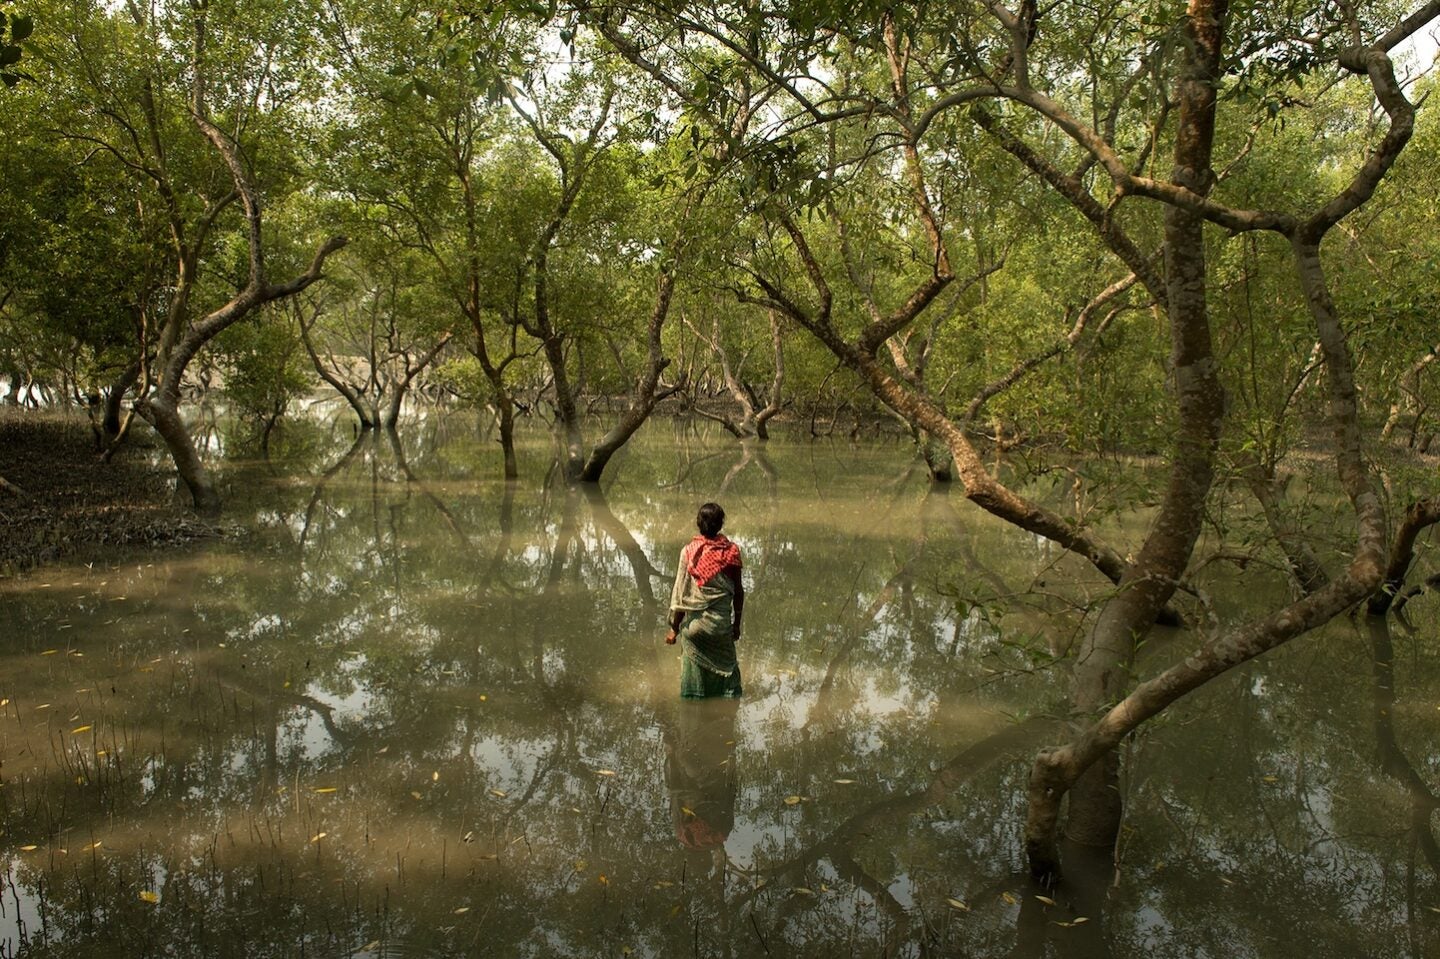 Kabita Mandal waits for a crab to bite her line as the tide begins to rise. She is one of many “tiger widows” who eke out a livelihood in the Sundarbans. (Photo Credit Arati Kumar-Rao)